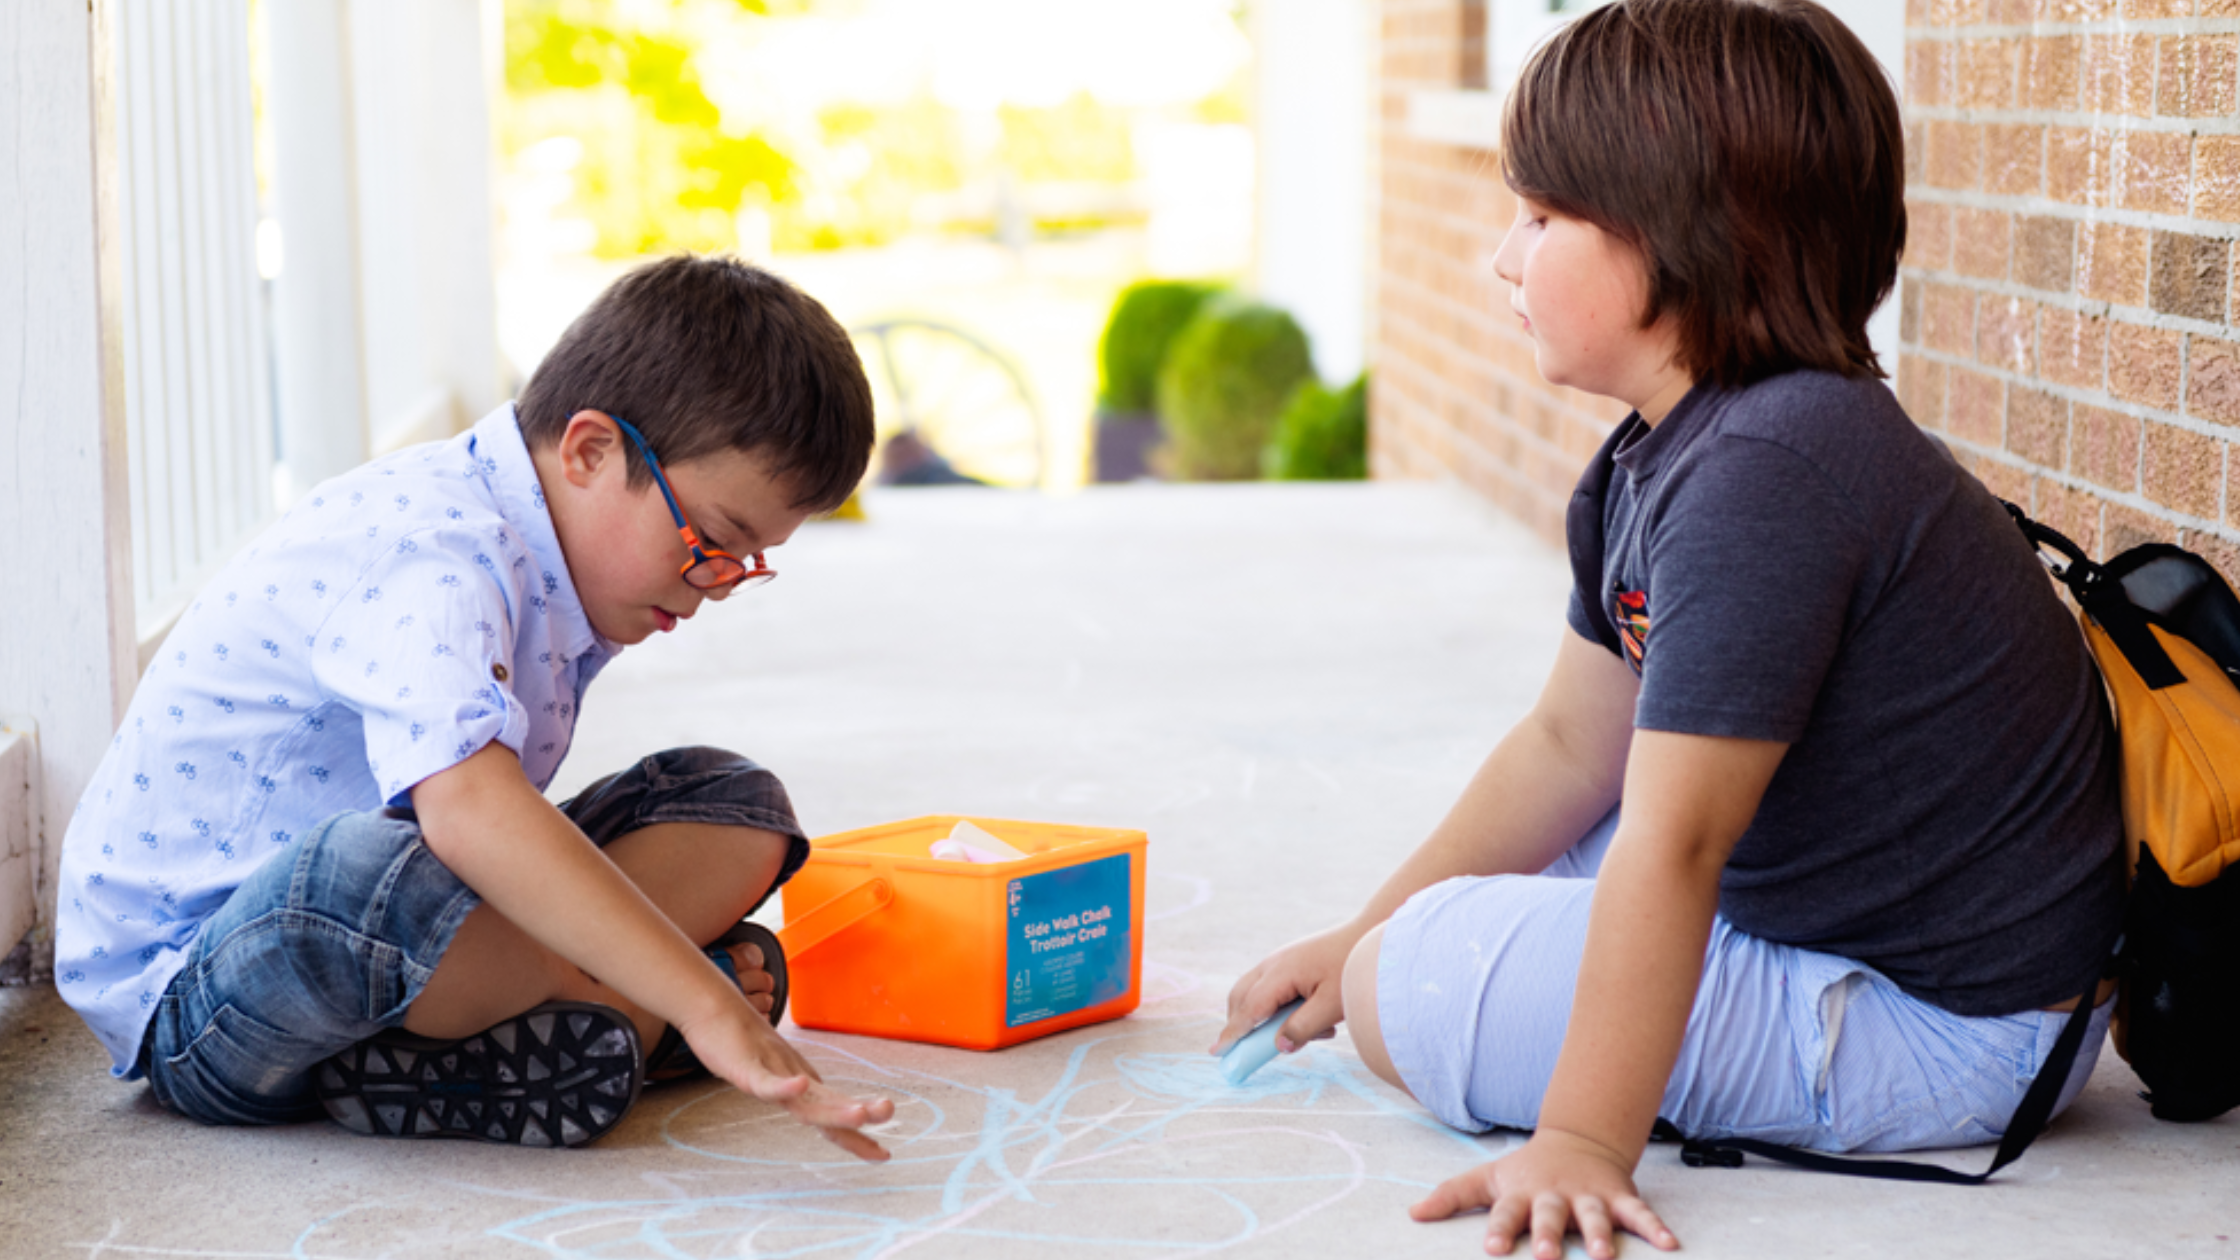 A boy with autism and his brother playing with chalk together.